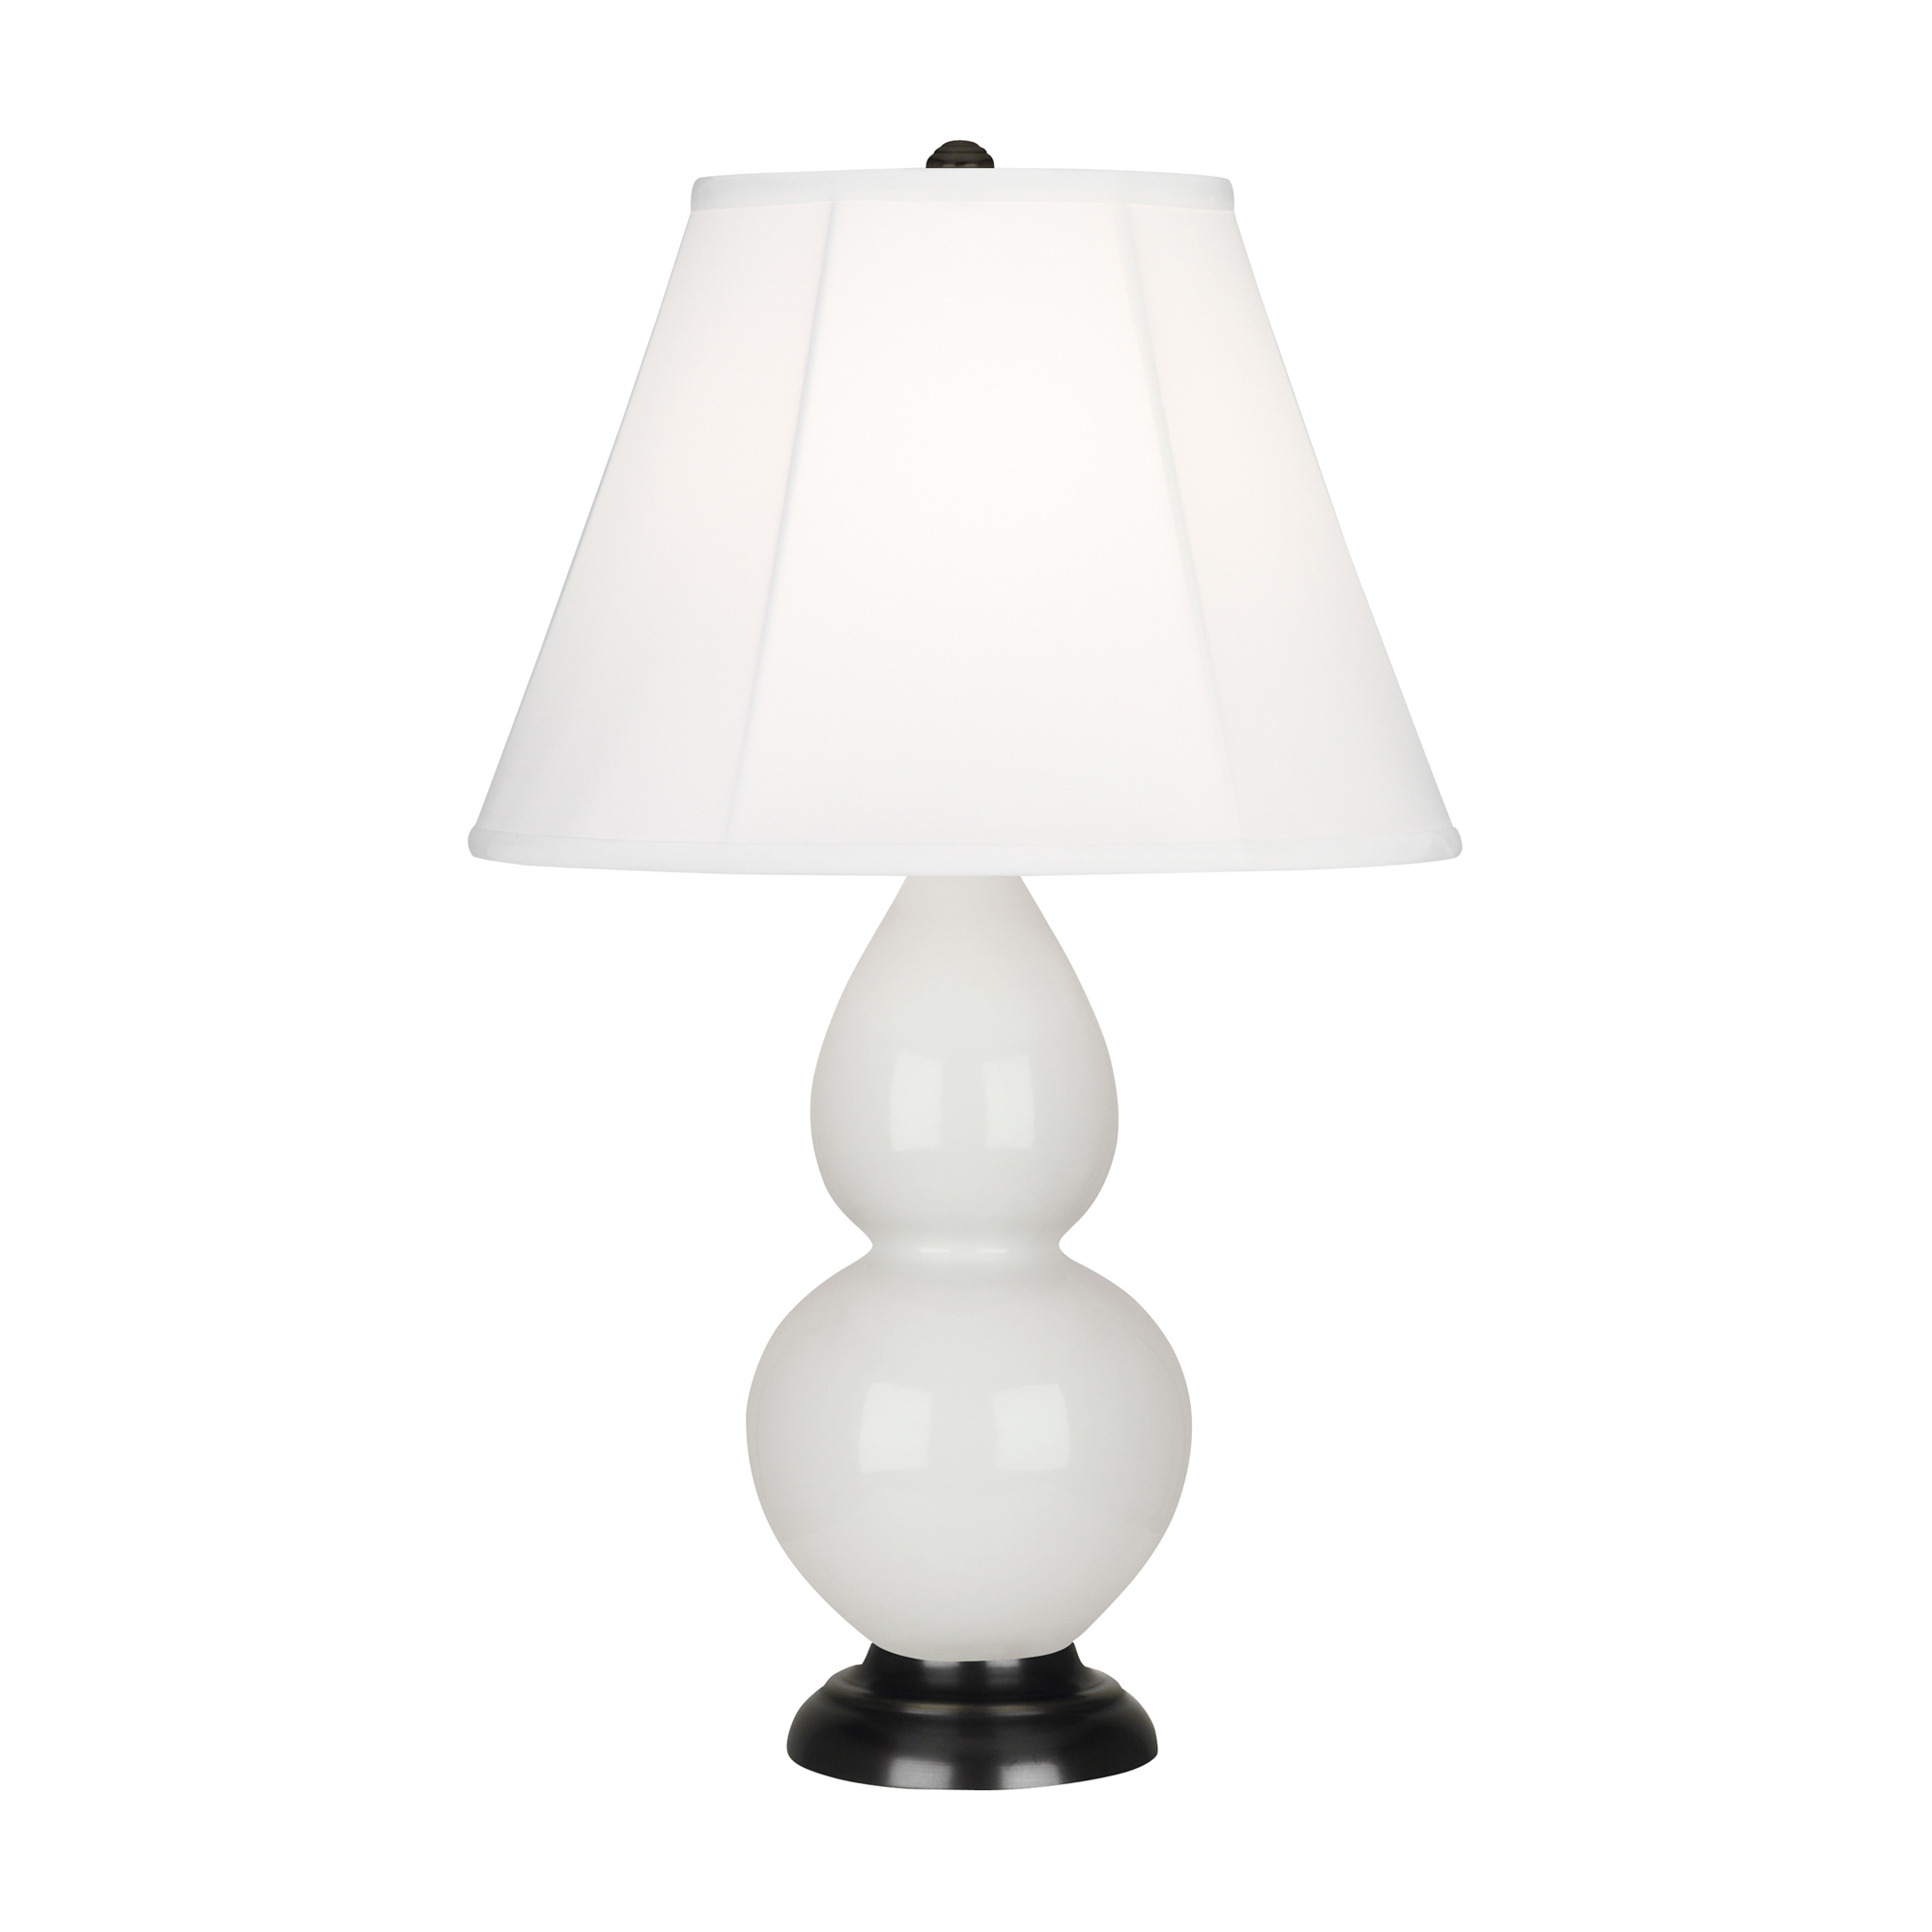 Small Double Gourd Accent Lamp Style #1650